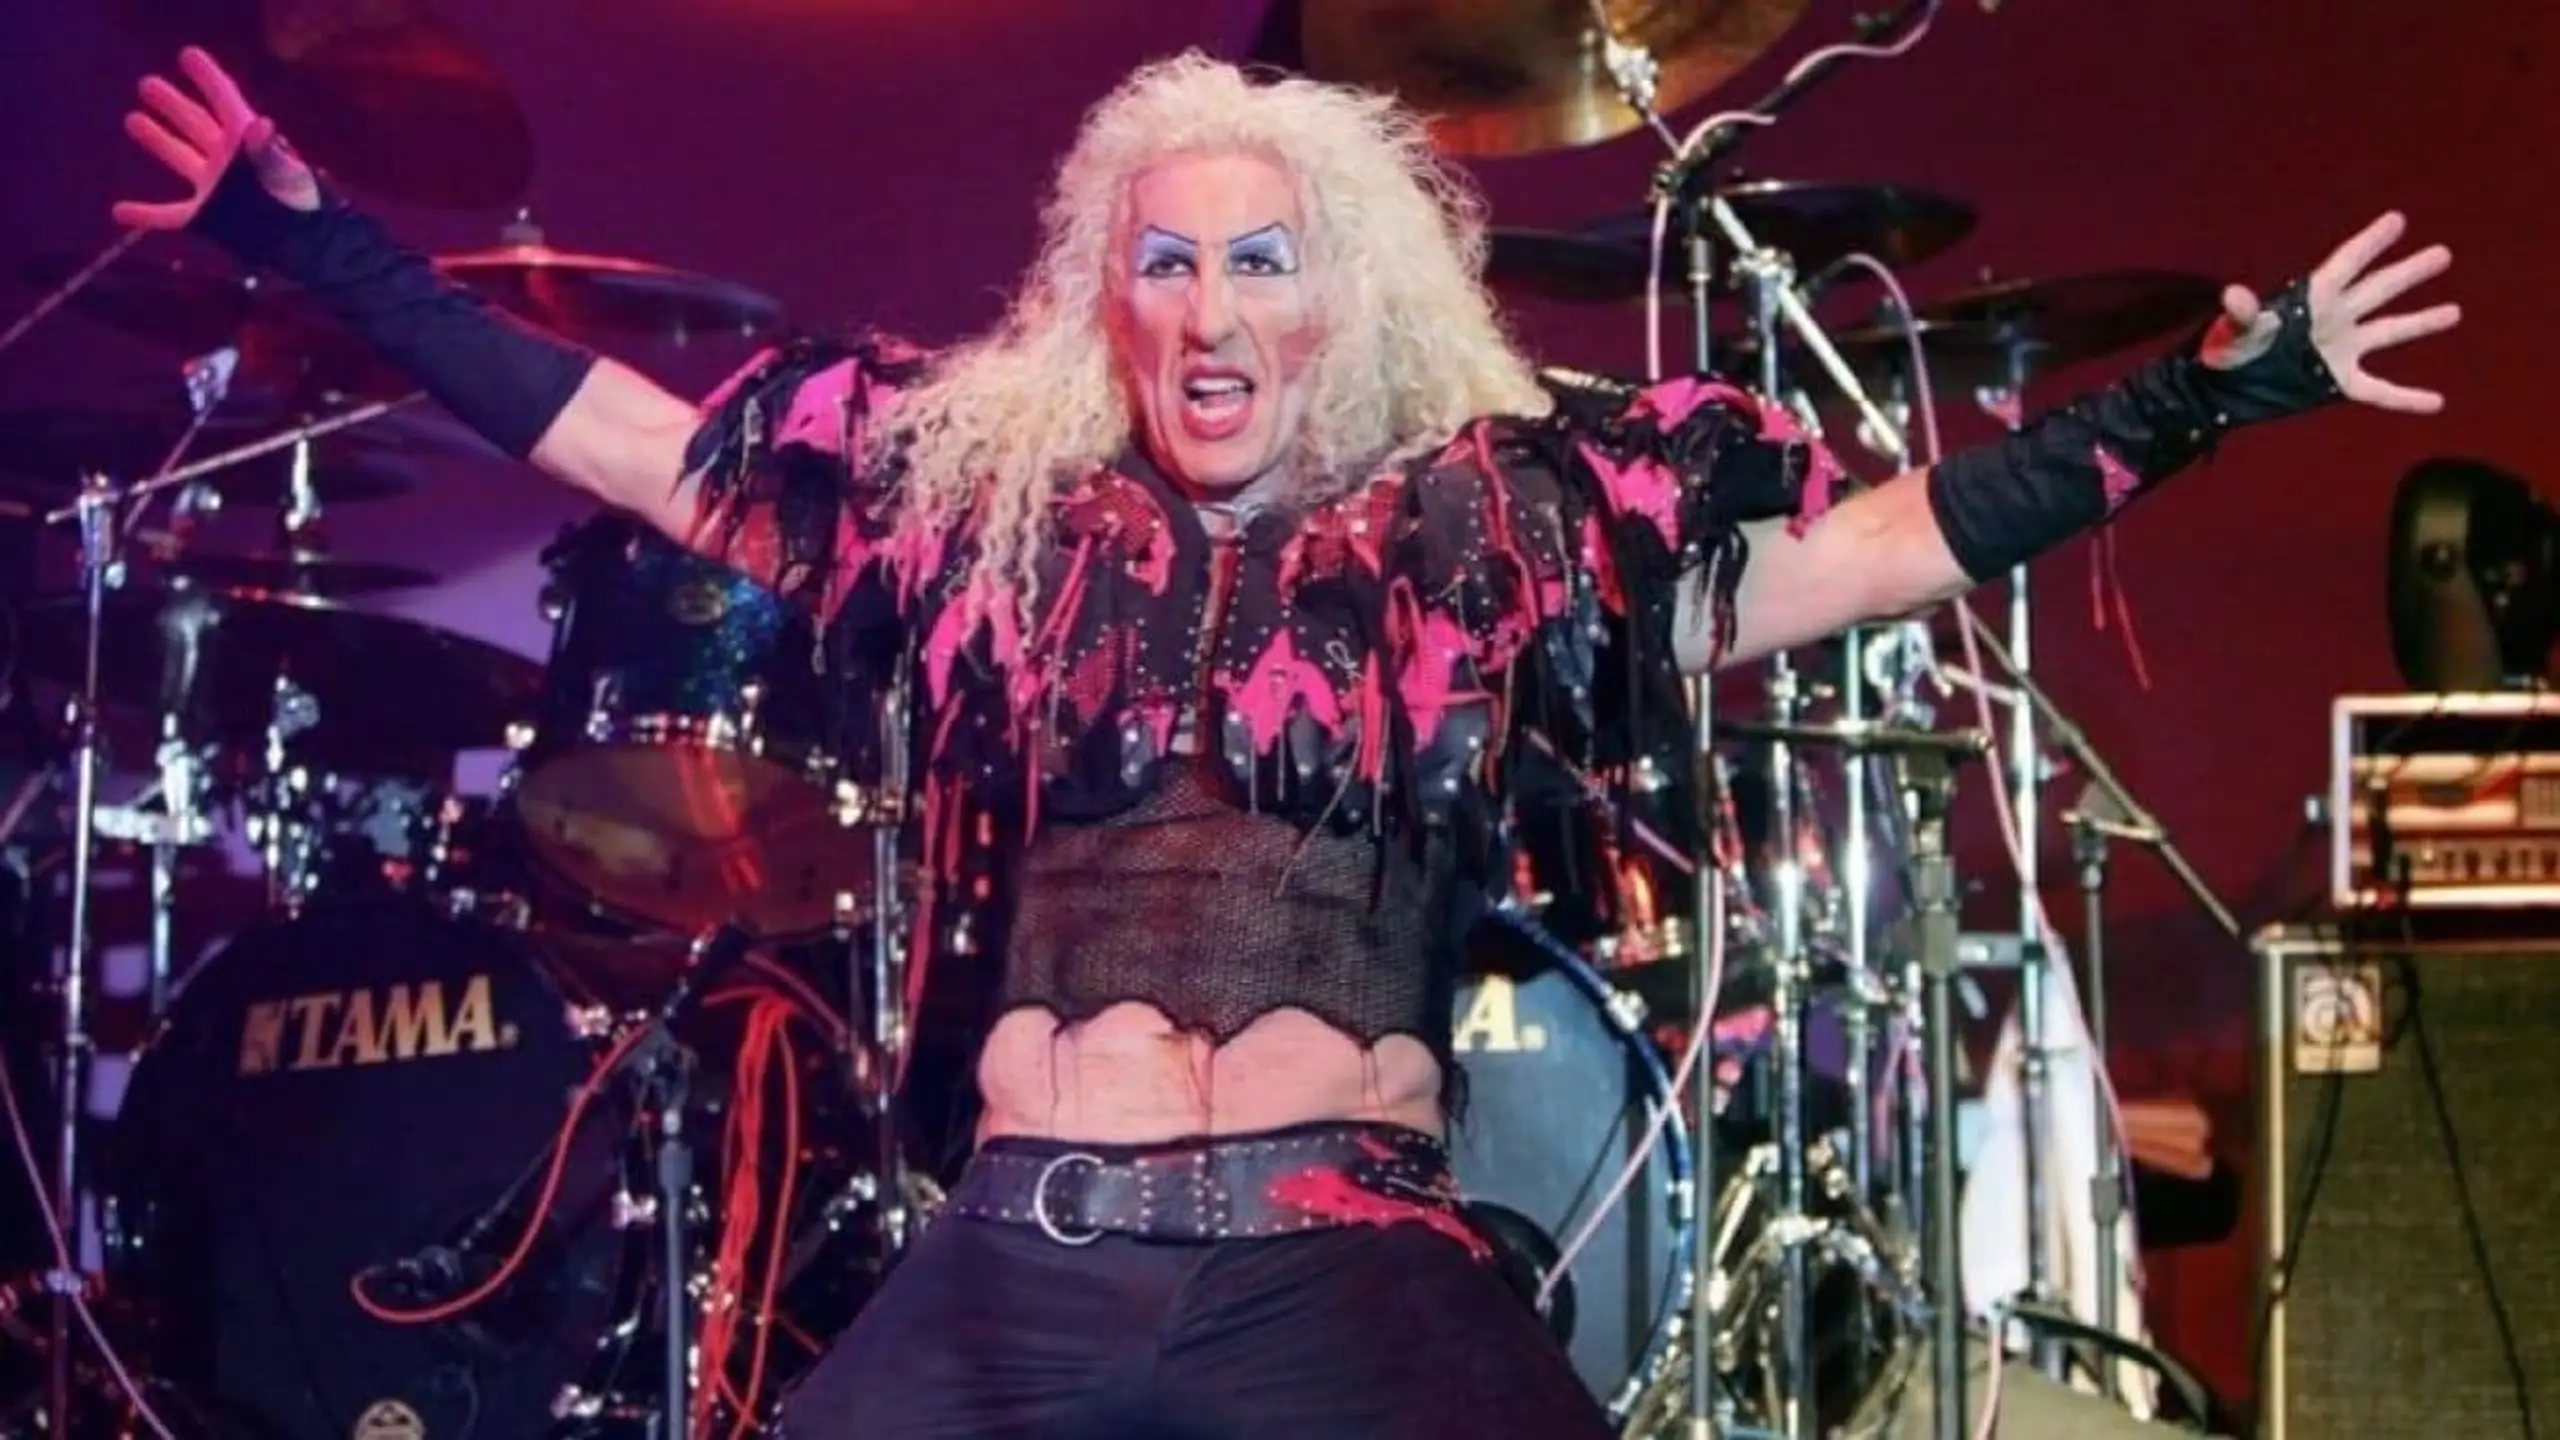 Twisted Sister - Metal Meltdown - Live From The Hard Rock Casino Las Vegas